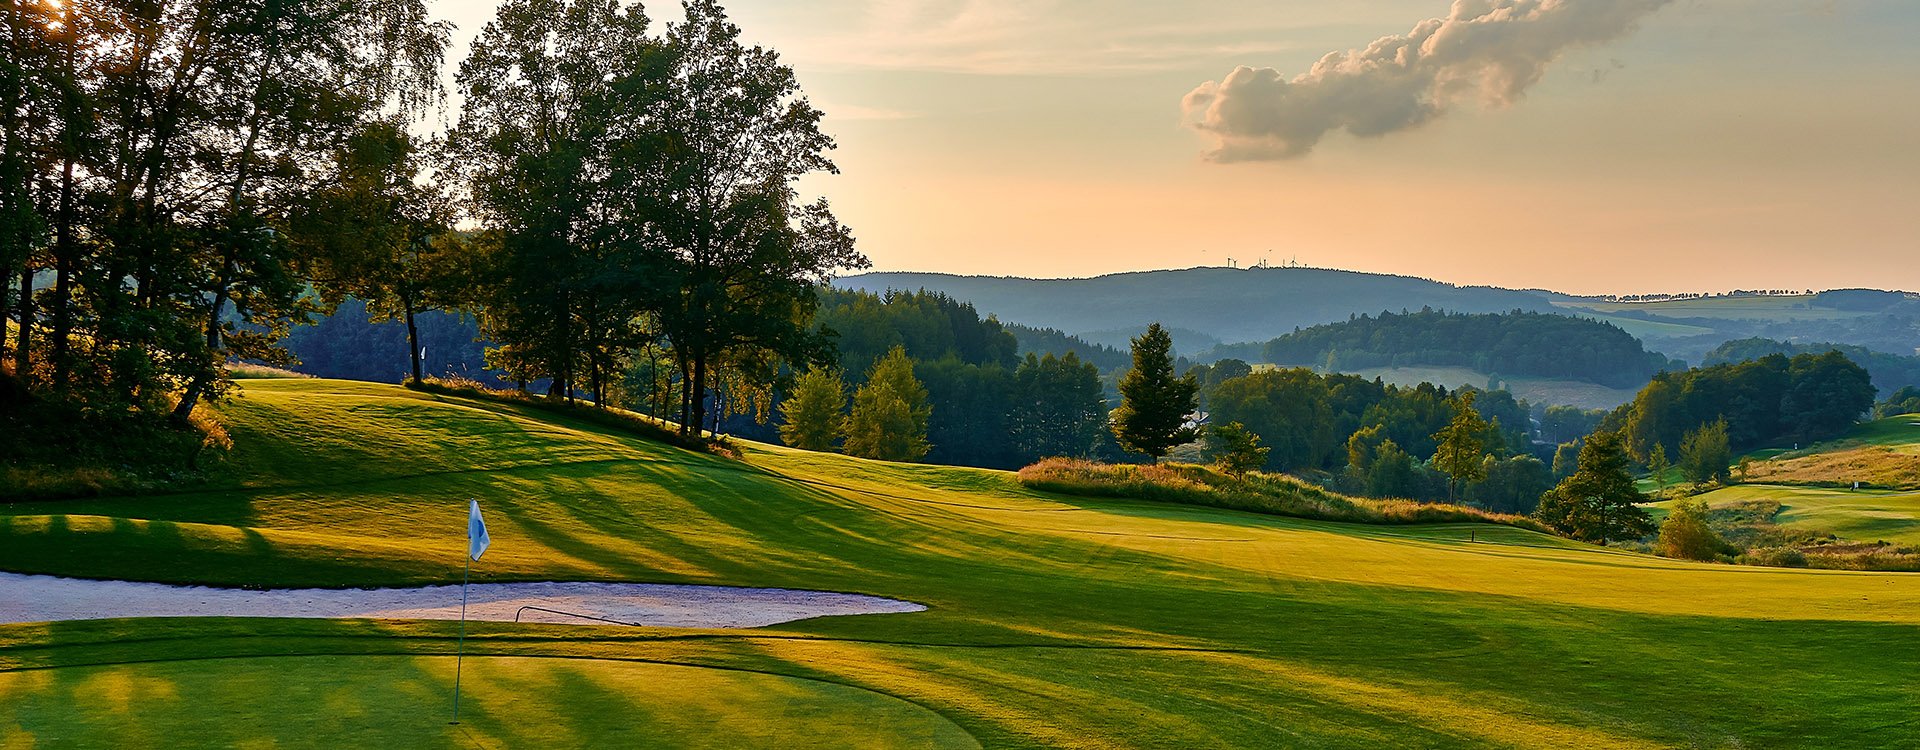 Sunset and golf course with flag, Europe. Czech Republic.